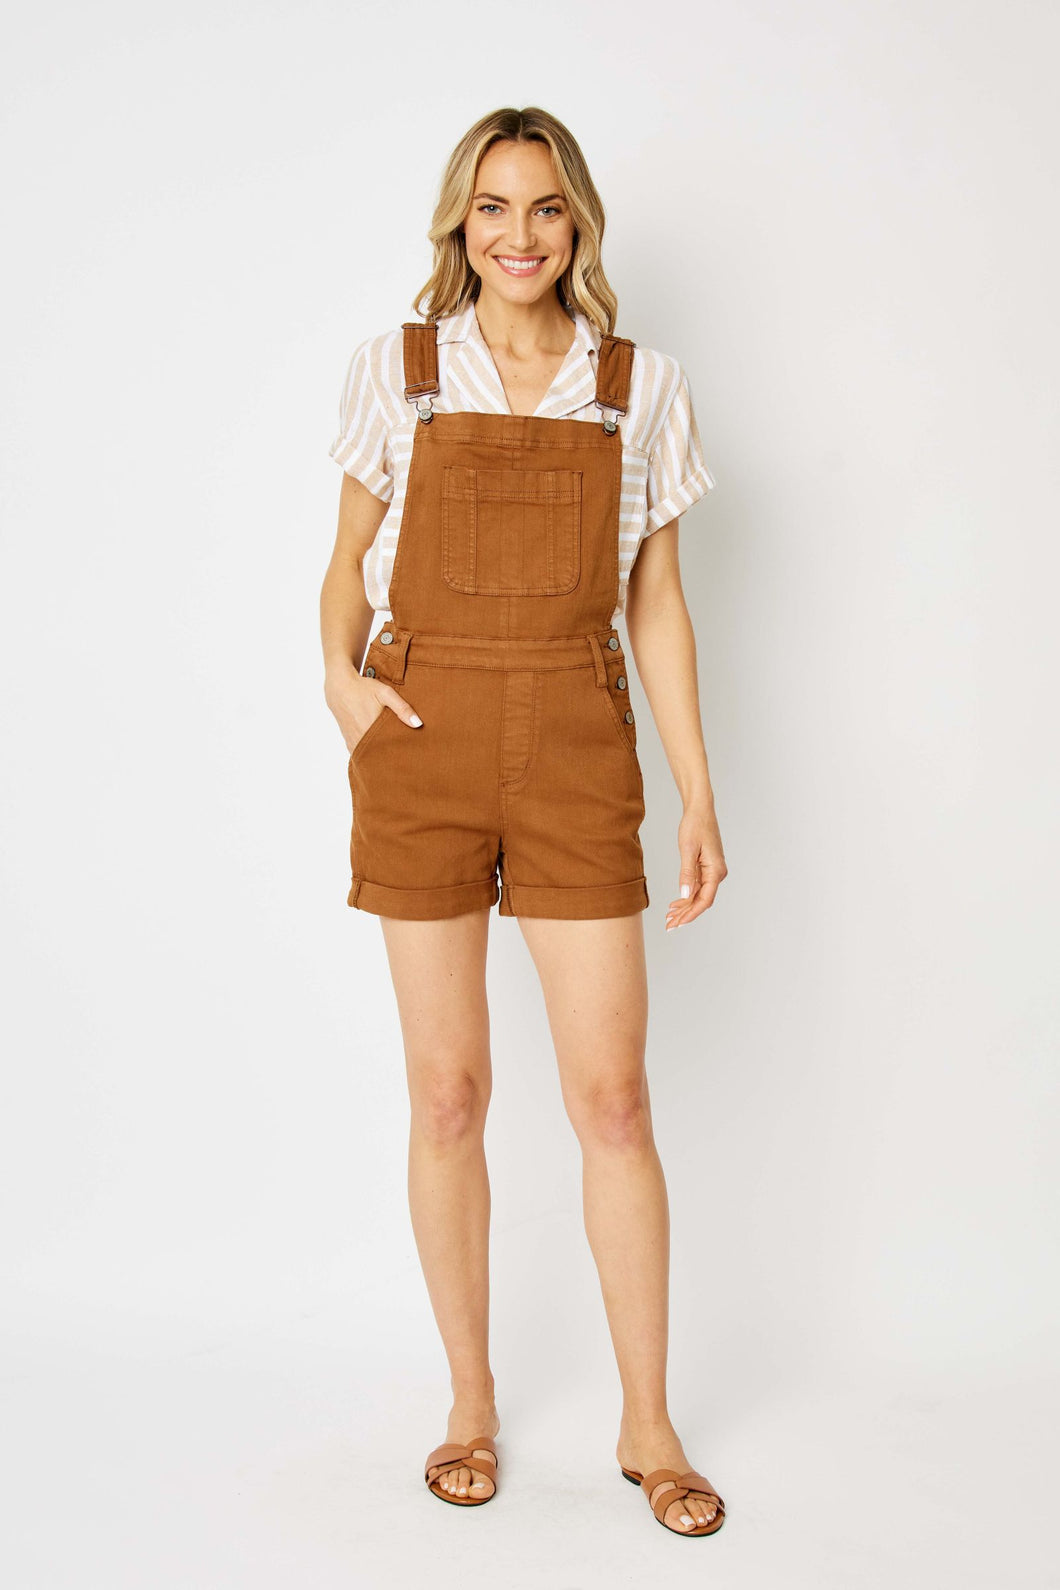 Brown overall shorts